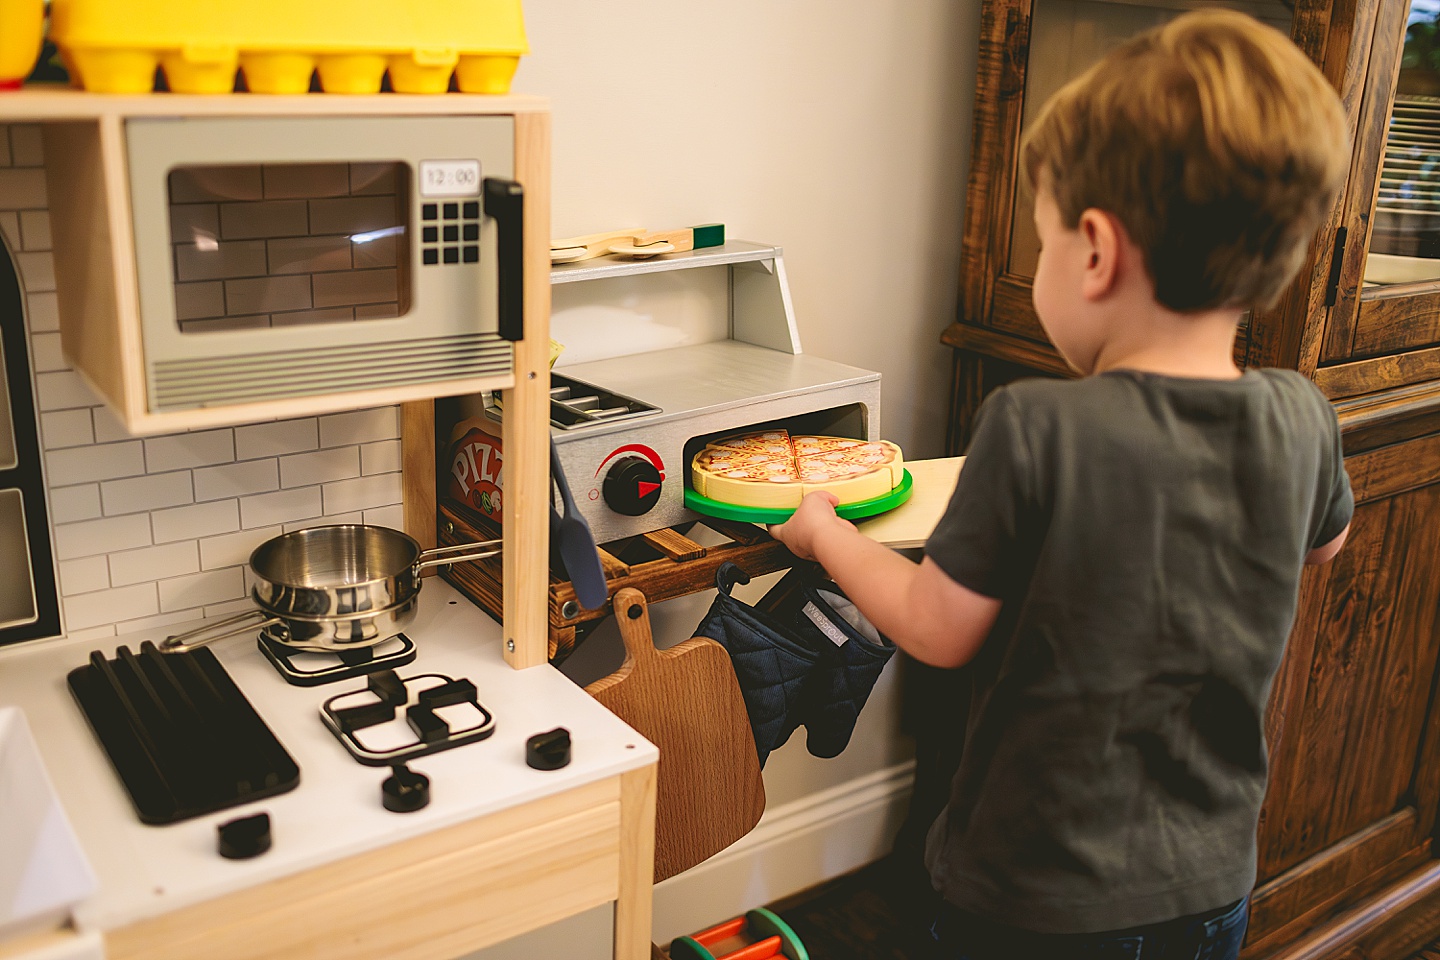 Toddler using play kitchen to make pizza for his family